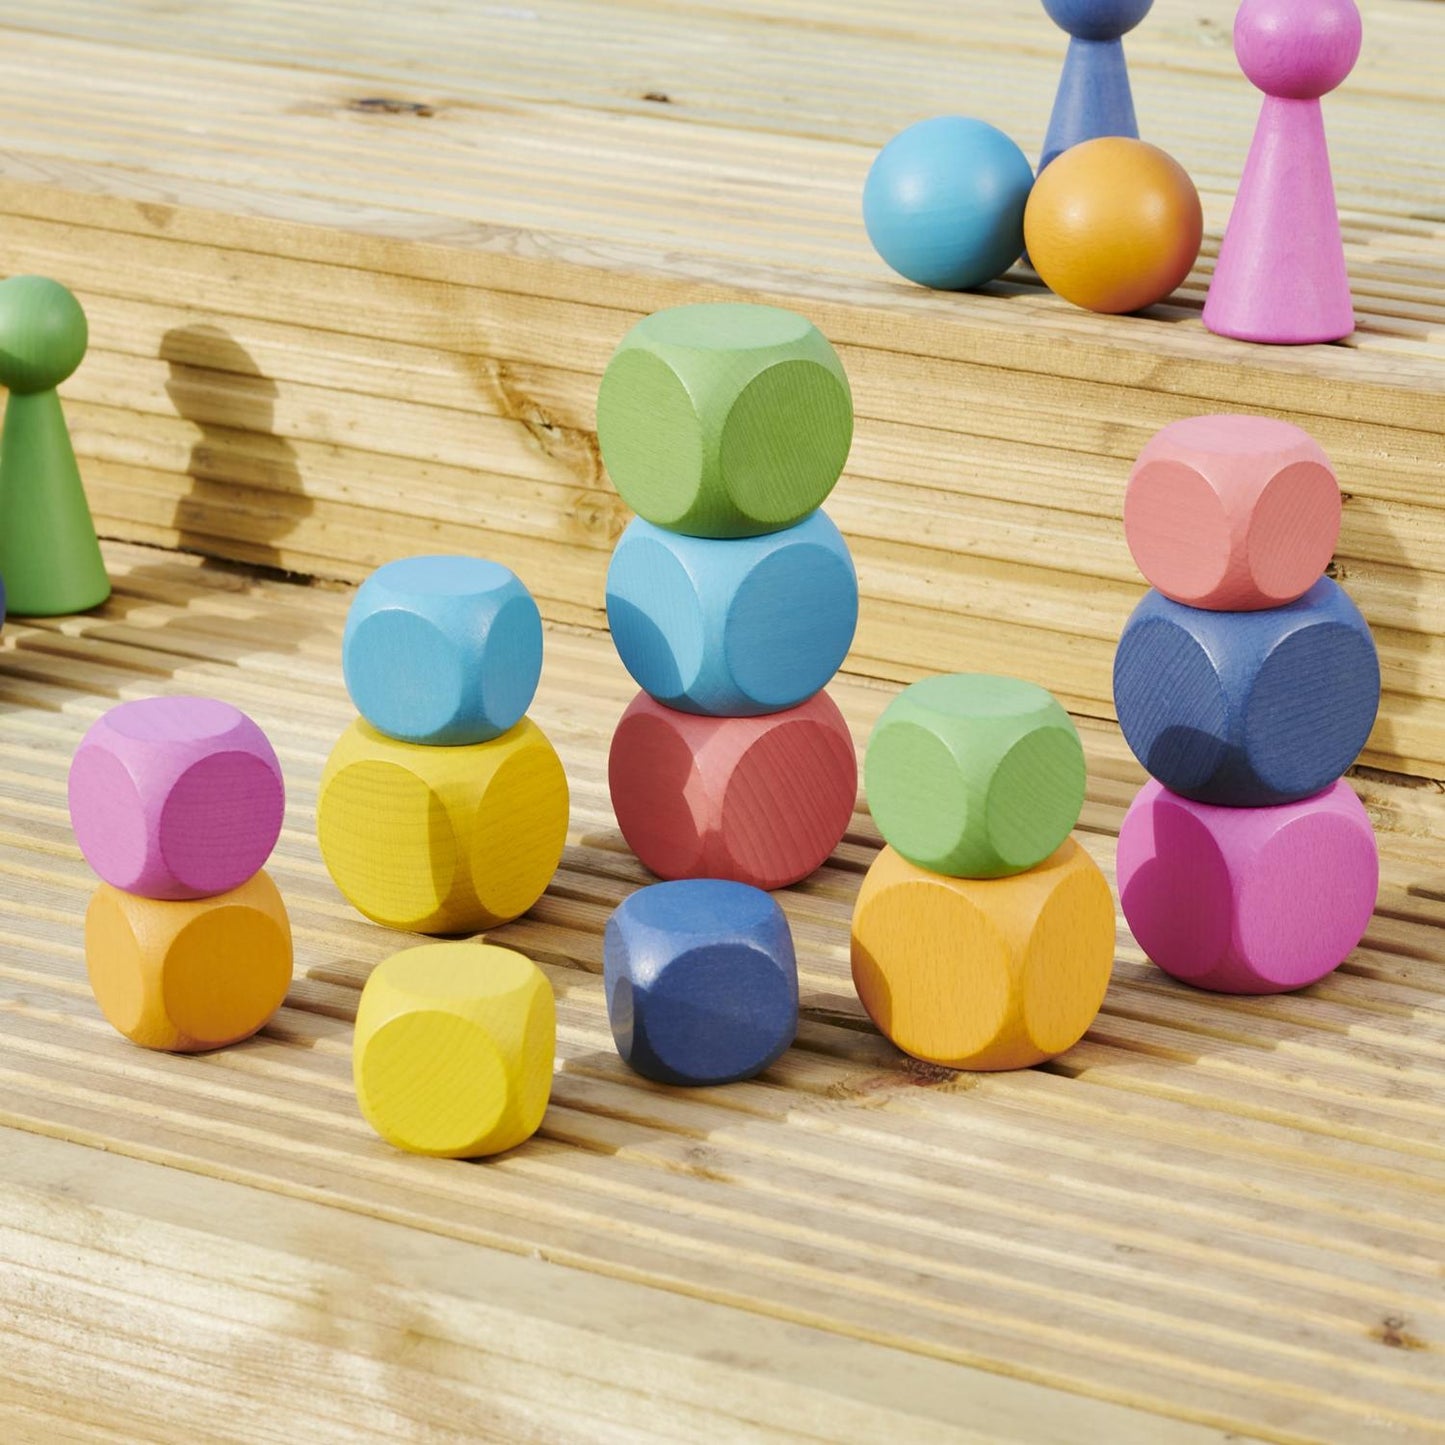 Rainbow Wooden Cubes | Wooden Loose Parts | Open-Ended Toys